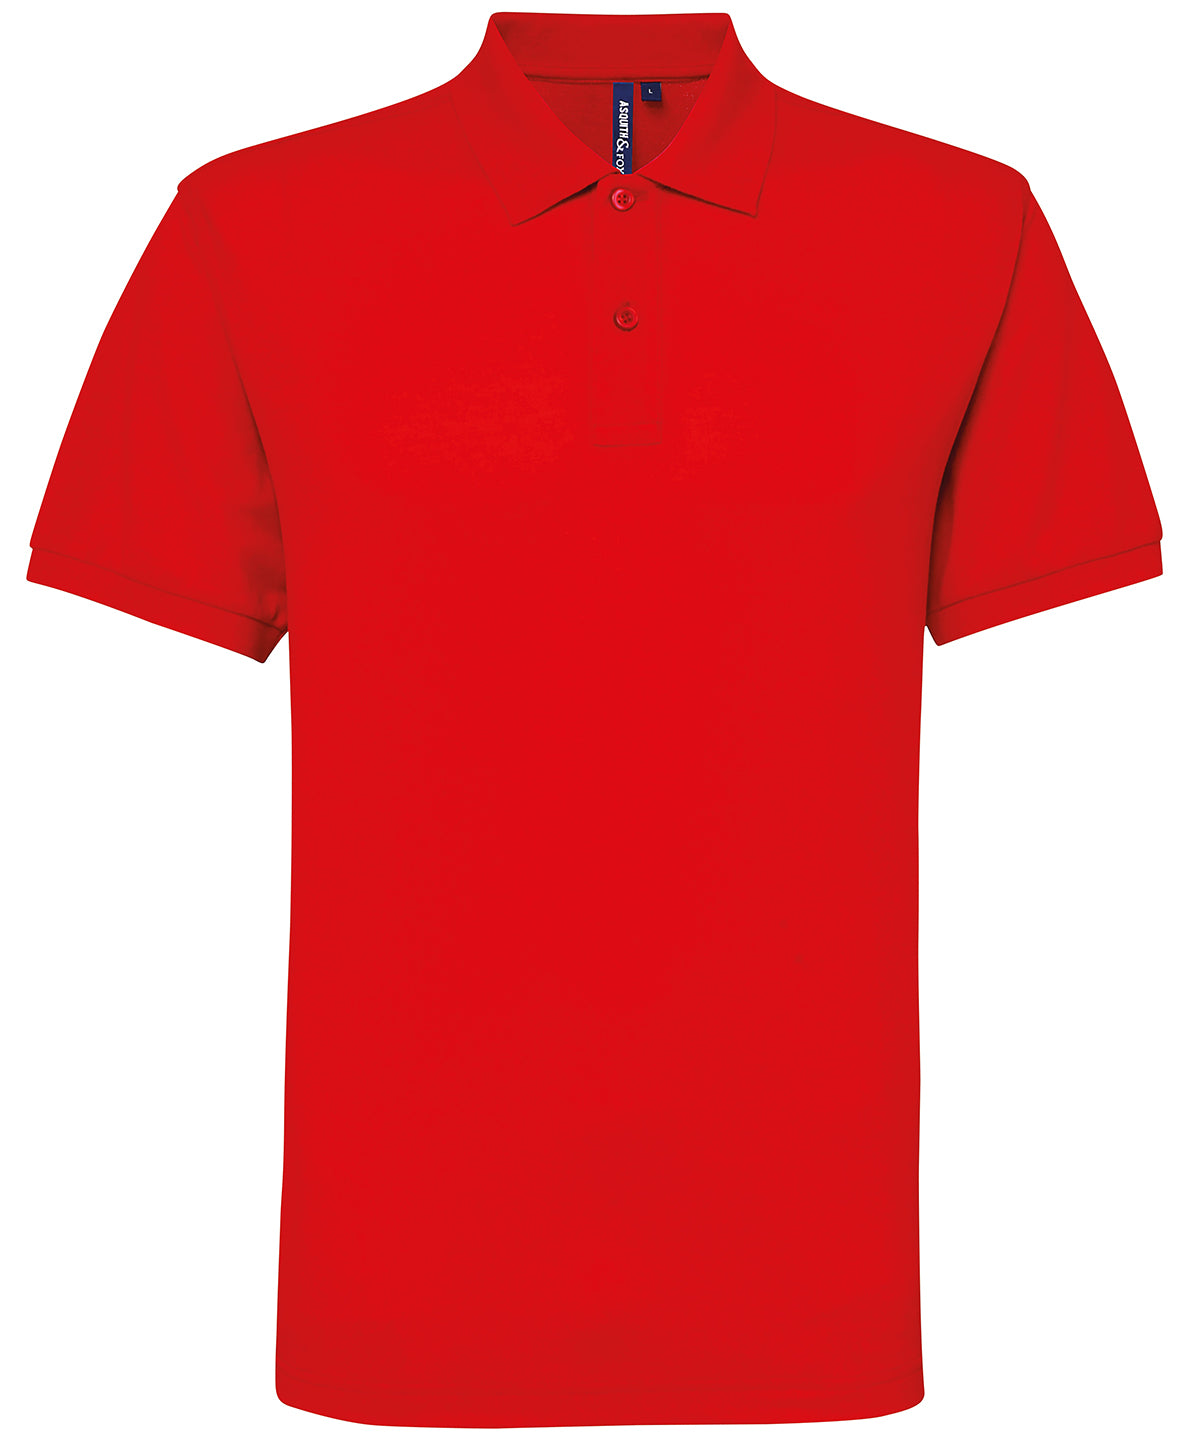 Personalised Polo Shirts - Bottle Asquith & Fox Men’s polycotton blend polo